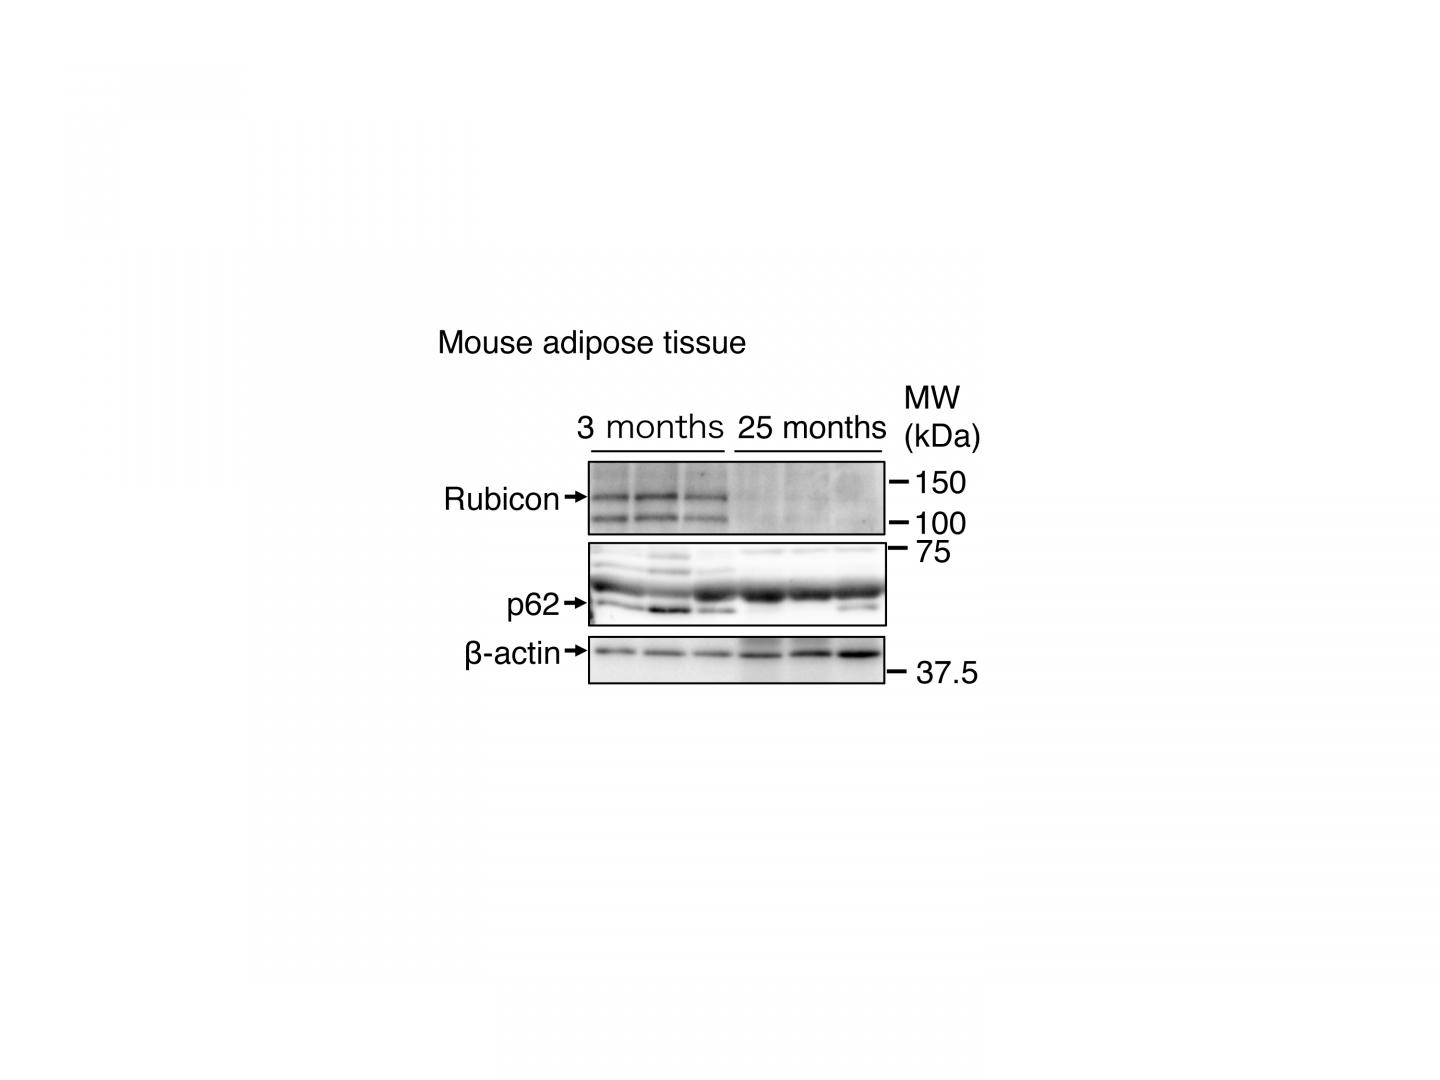 Rubicon Levels in Mouse Adipose Tissue Decrease with Age